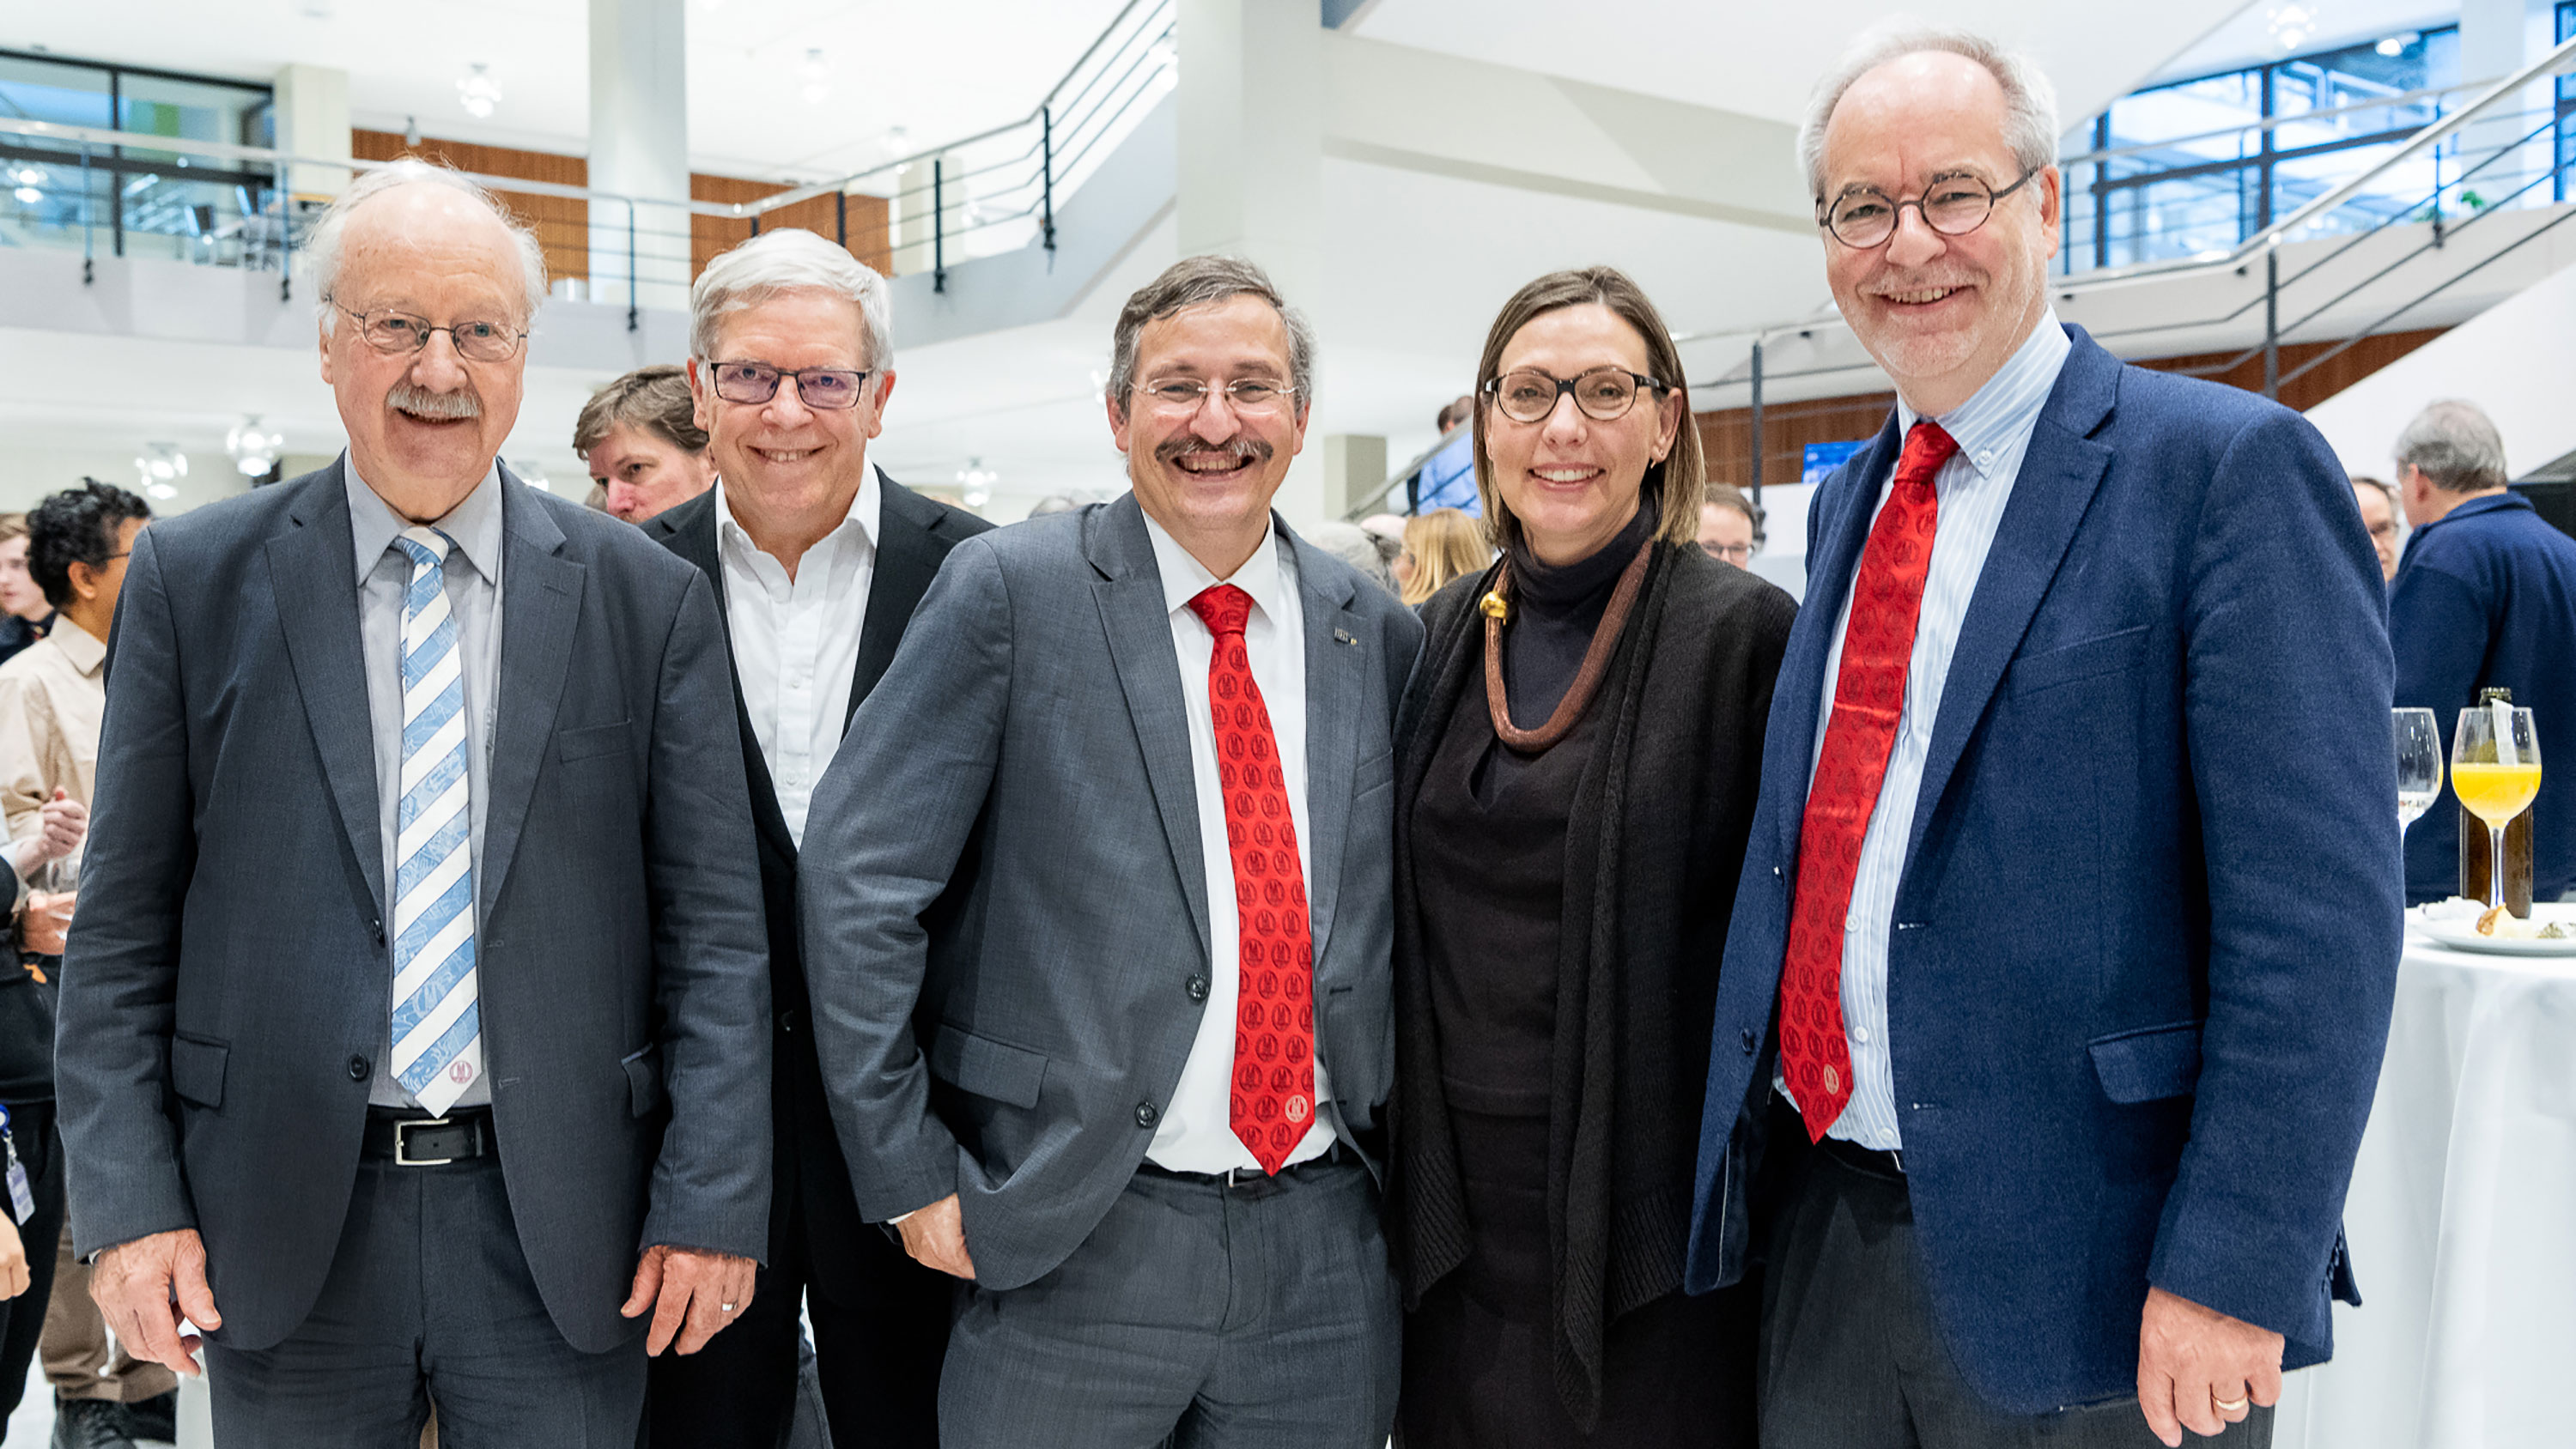 Hans Weder (UZH President from 2000-2008), Andreas Fischer (UZH President from 2008-2013), President ad interim Gabriele Siegert and Otfried Jarren (President ad interim from 2013-2014) also attended the event at Irchel.